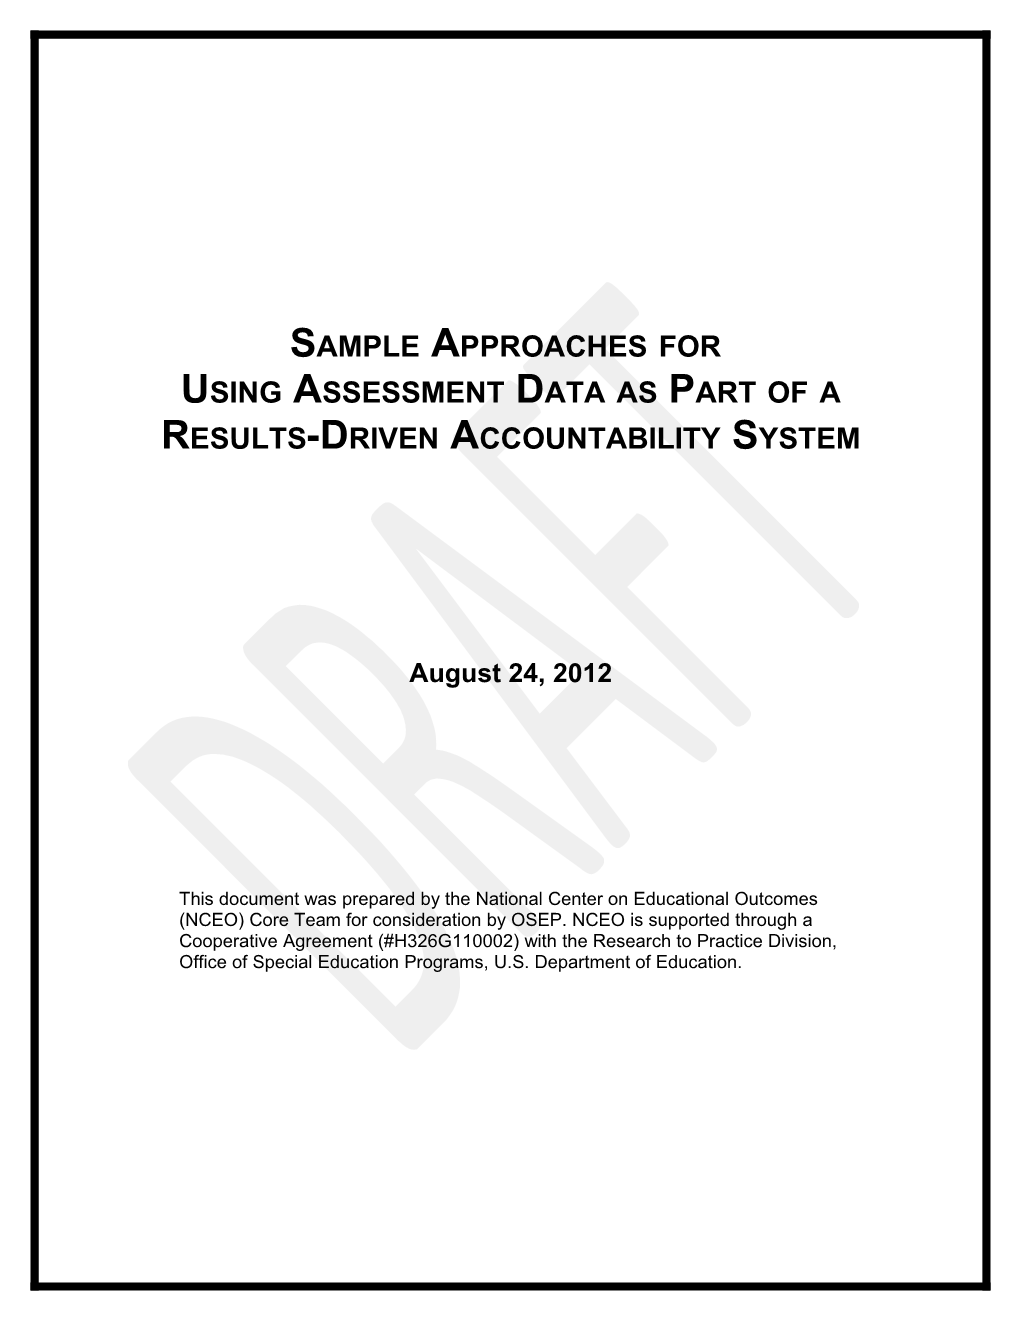 Sample Approaches for Using Assessment Data As Part of a Results-Driven Accountability